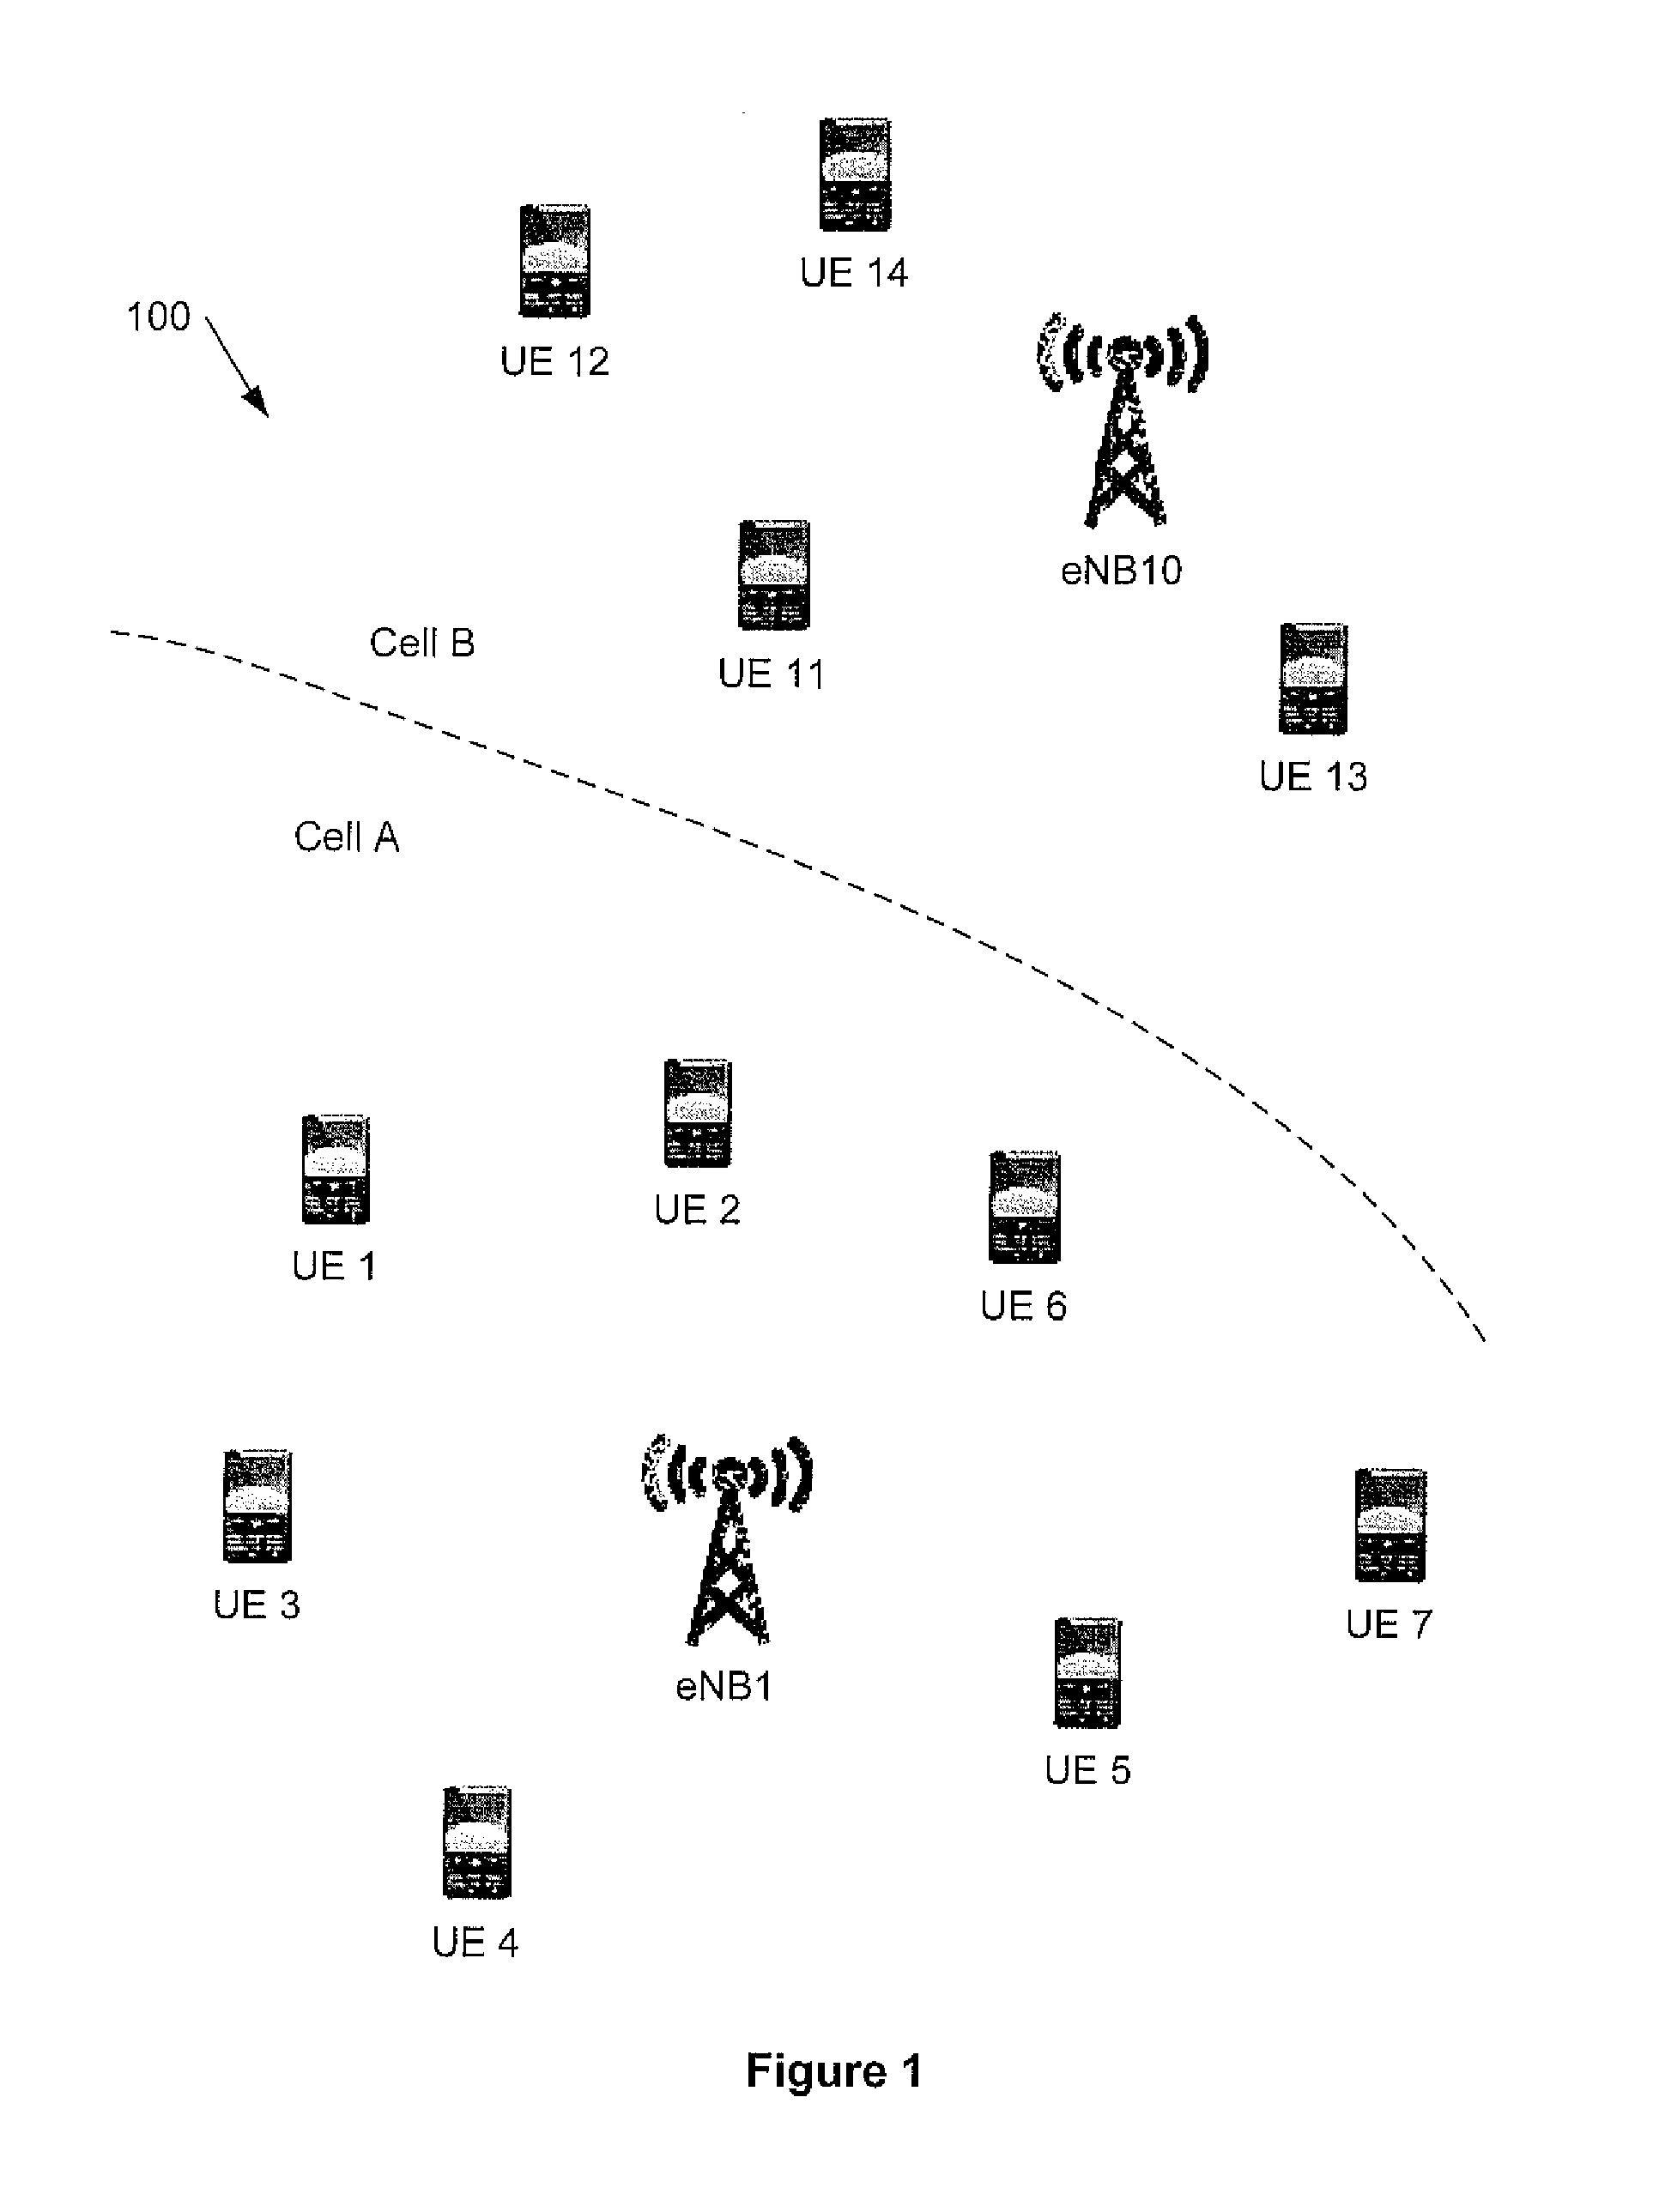 Signaling for device-to-device wireless communication